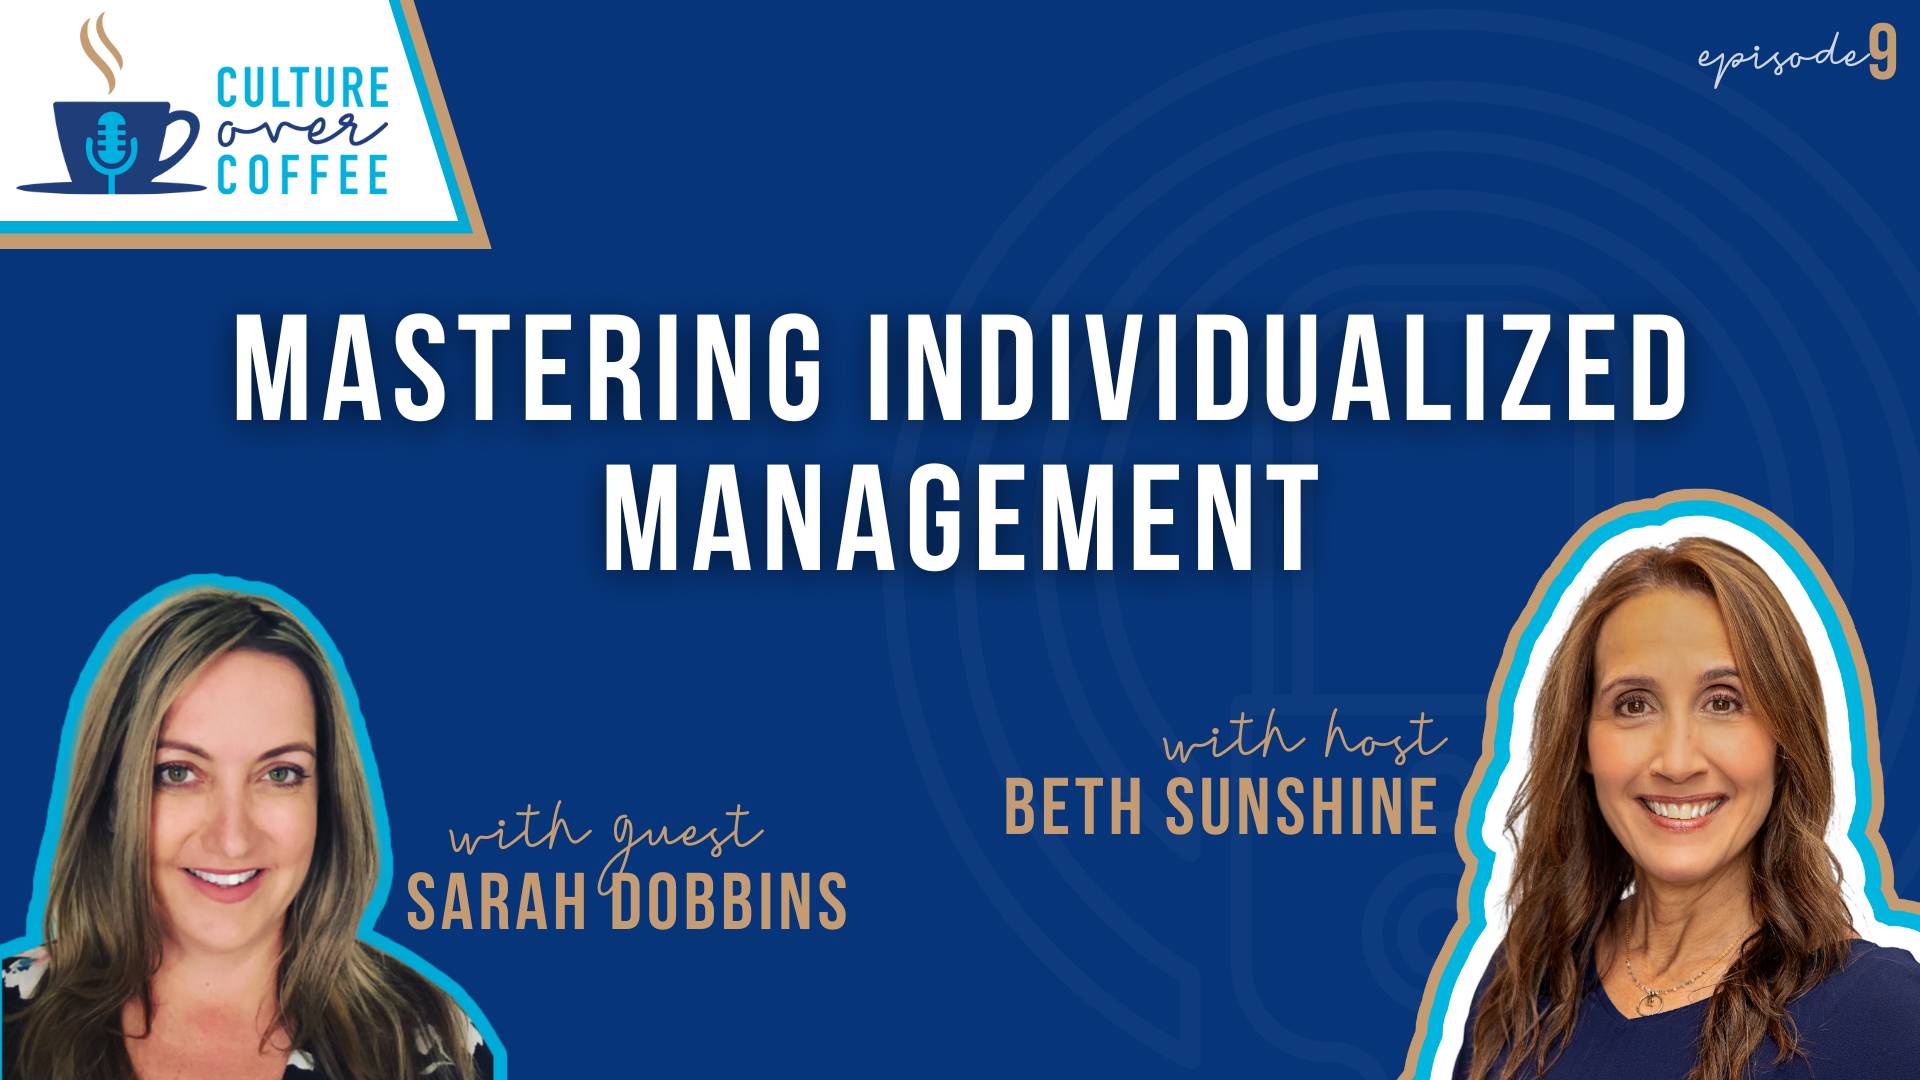 Culture Over Coffee Podcast: Mastering Individualized Management with Sarah Dobbins